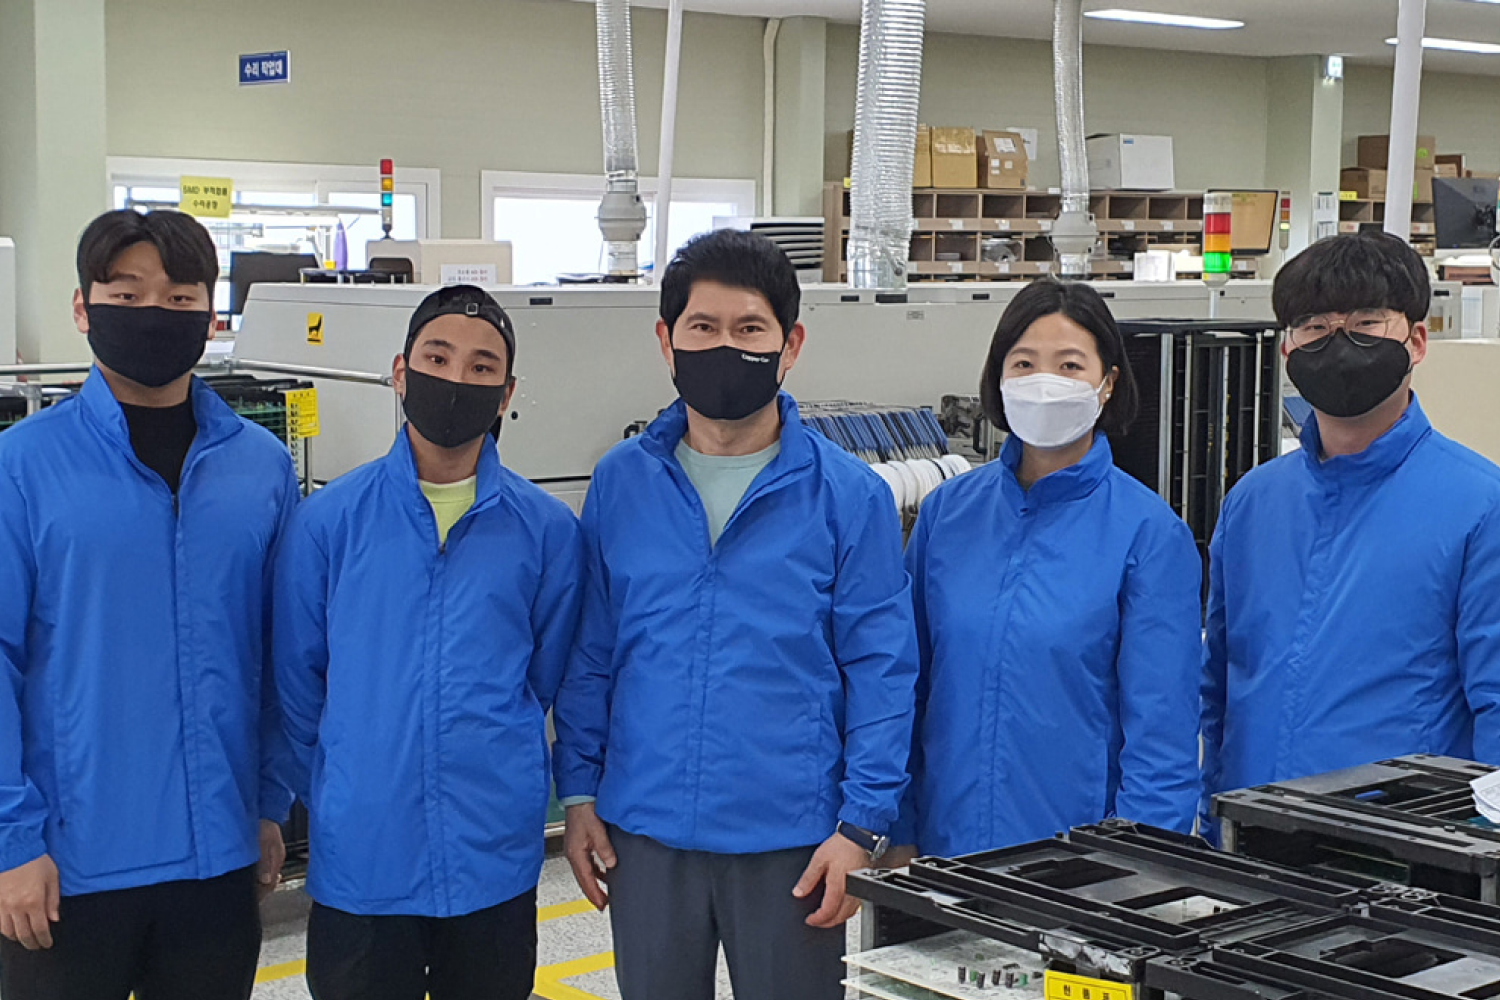 Group picture of Zenwell team in uniform in factory